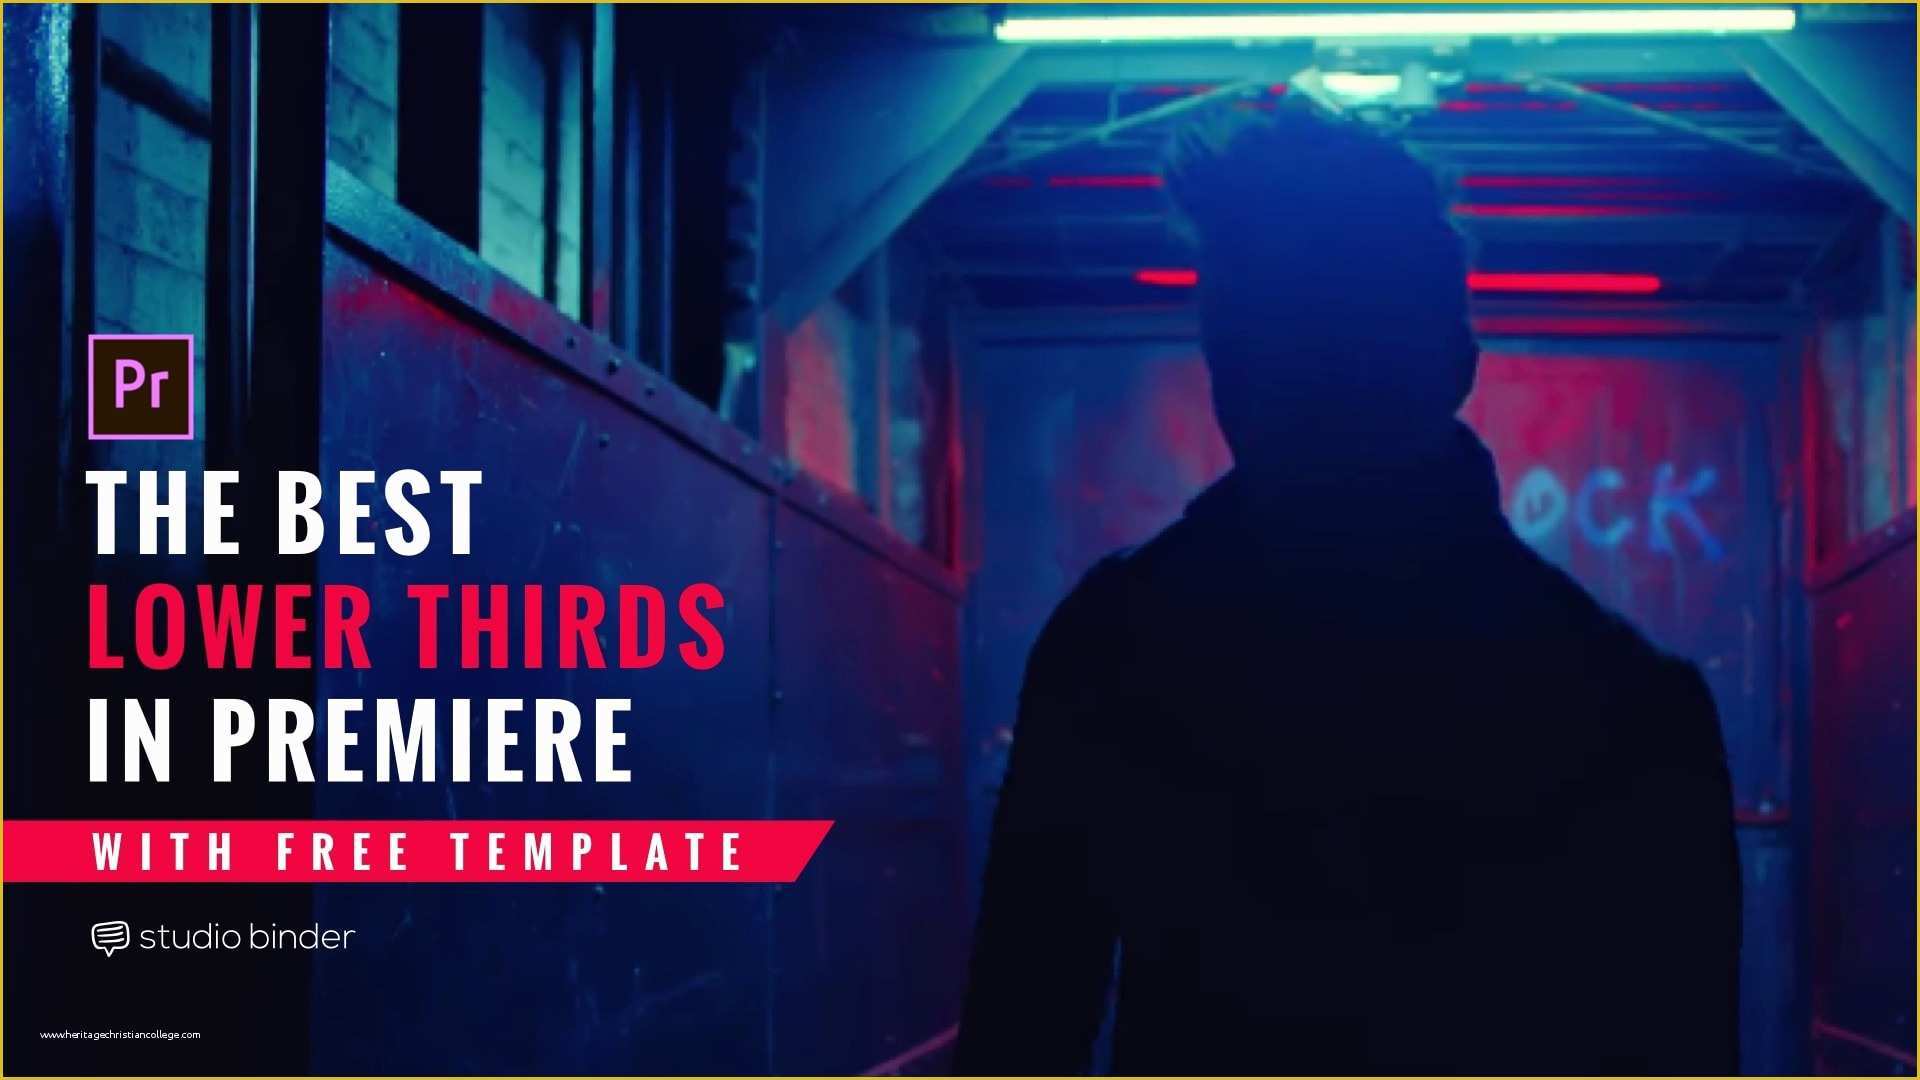 Premiere Pro Credits Template Free Of the Best Lower Thirds Templates for Premiere [free Download]